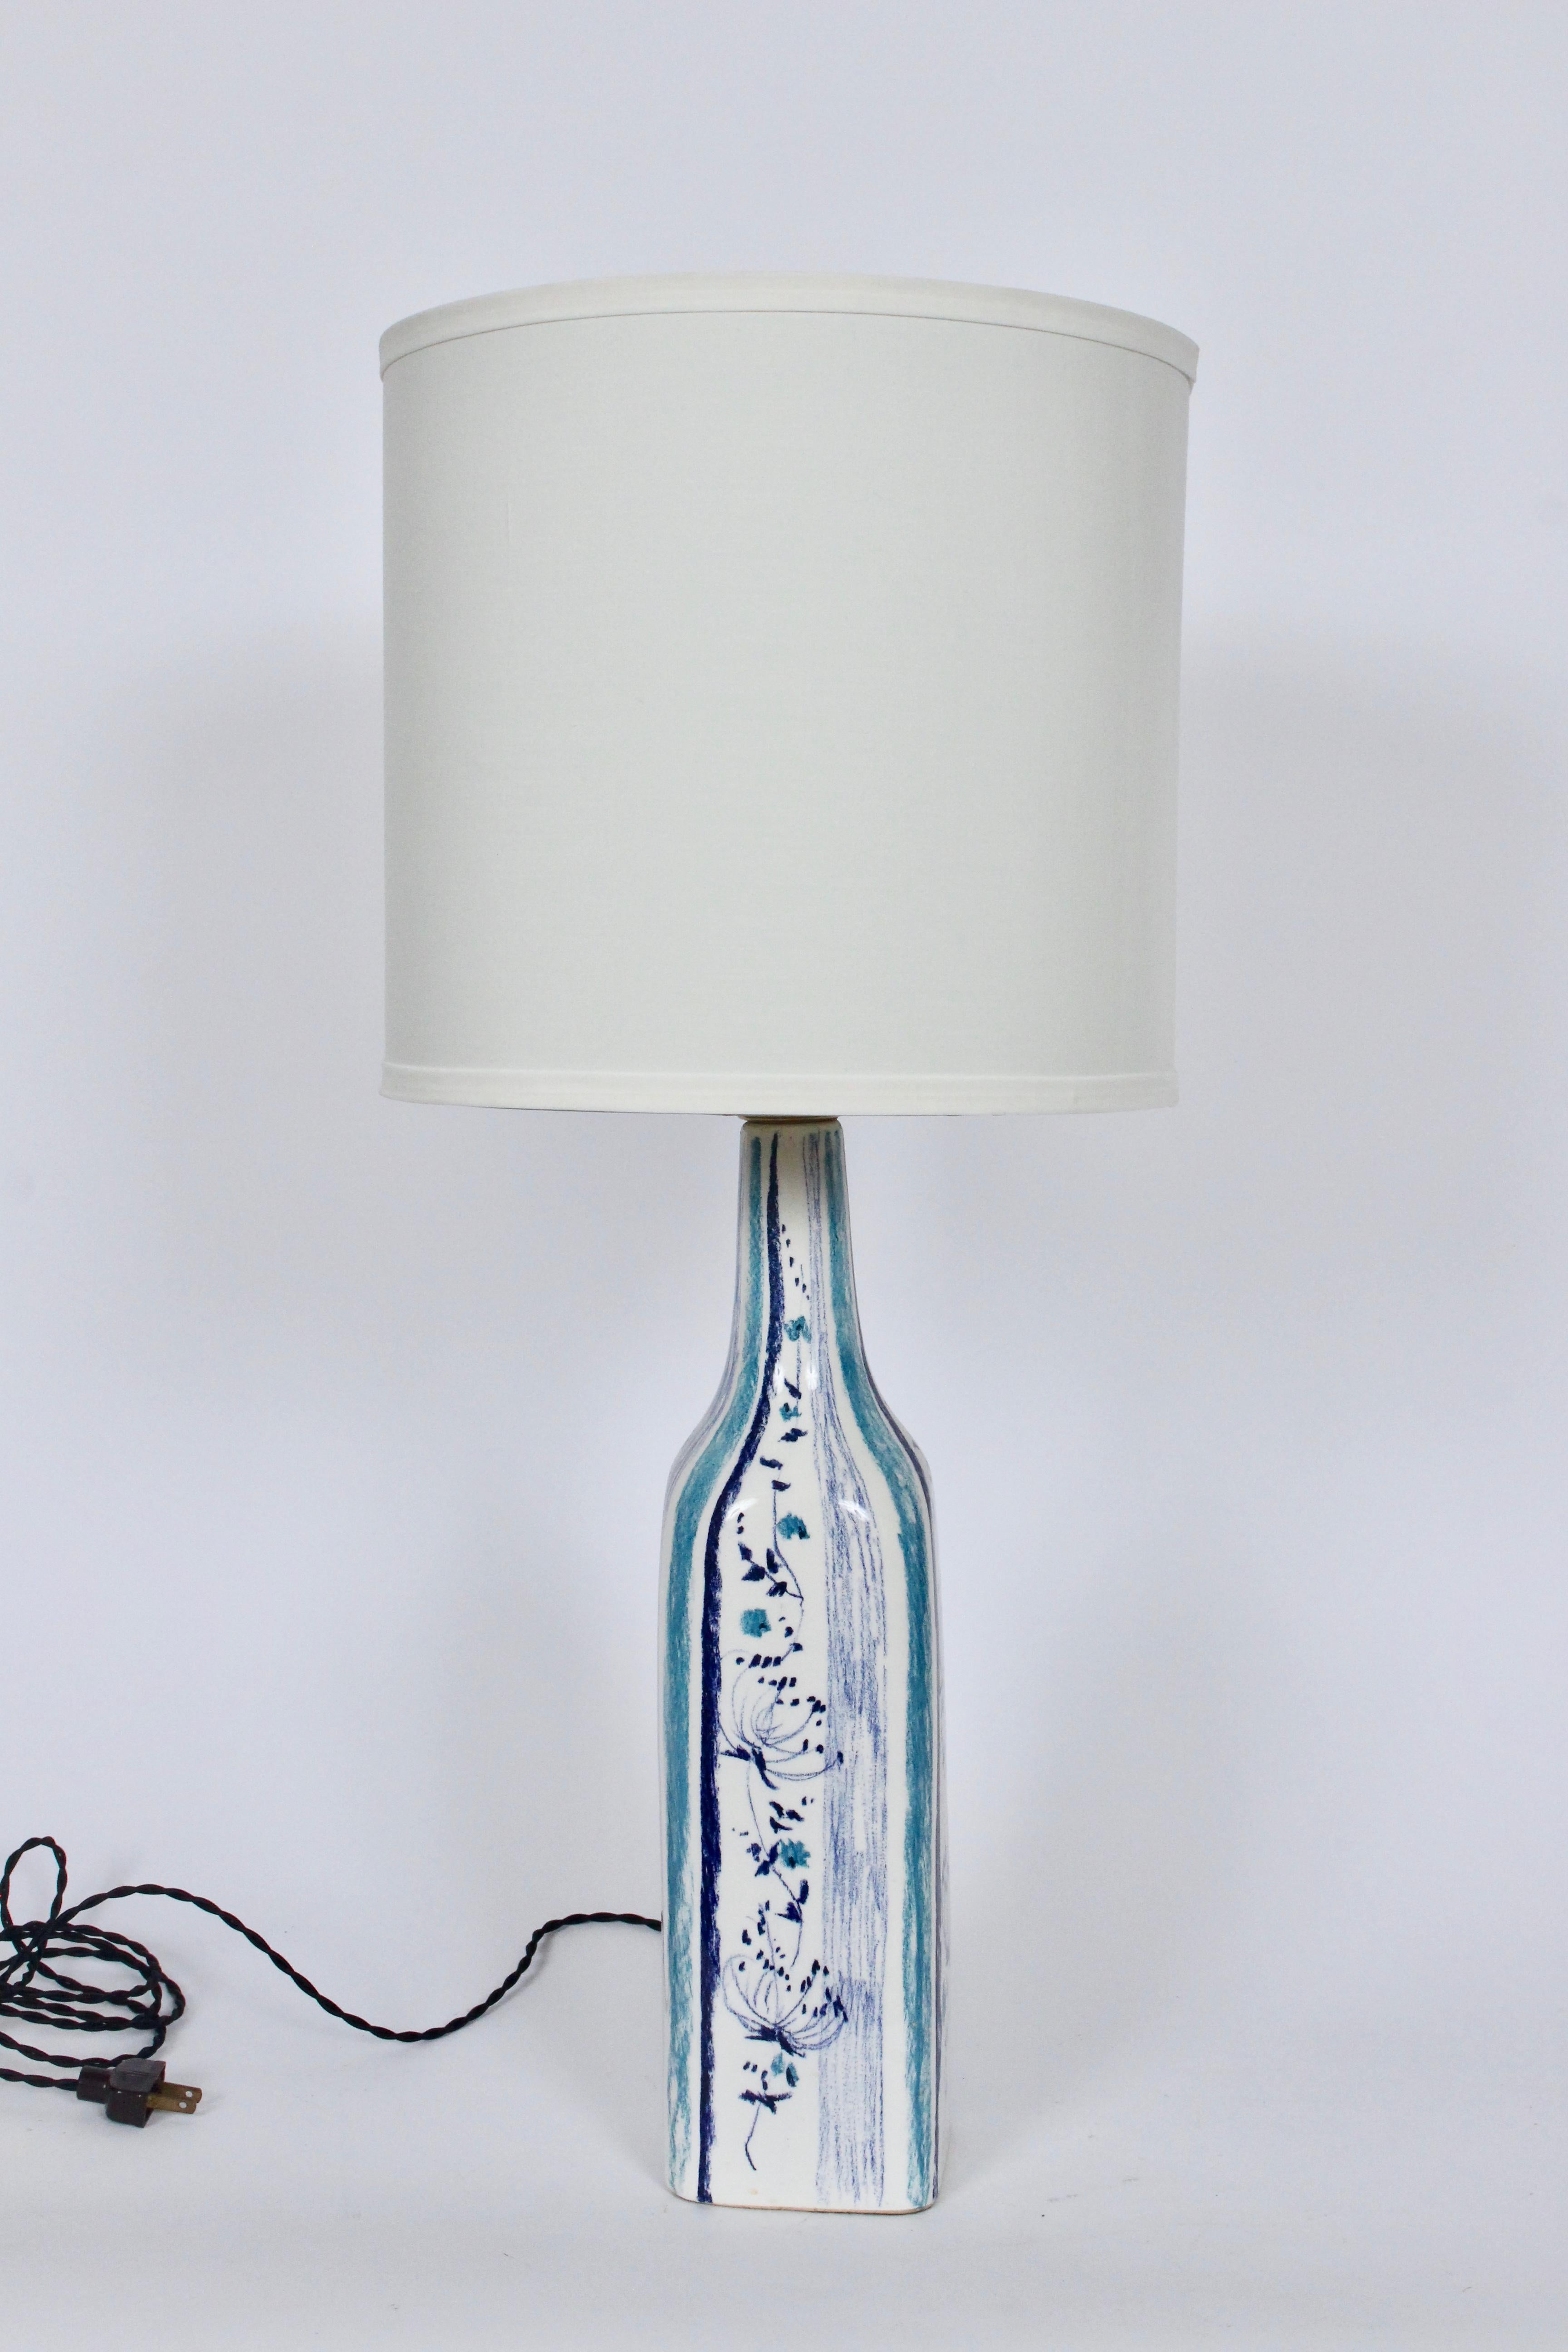 Viso Italy Hand Painted Blue Floral Art Pottery Table Lamp, 1960's For Sale 6